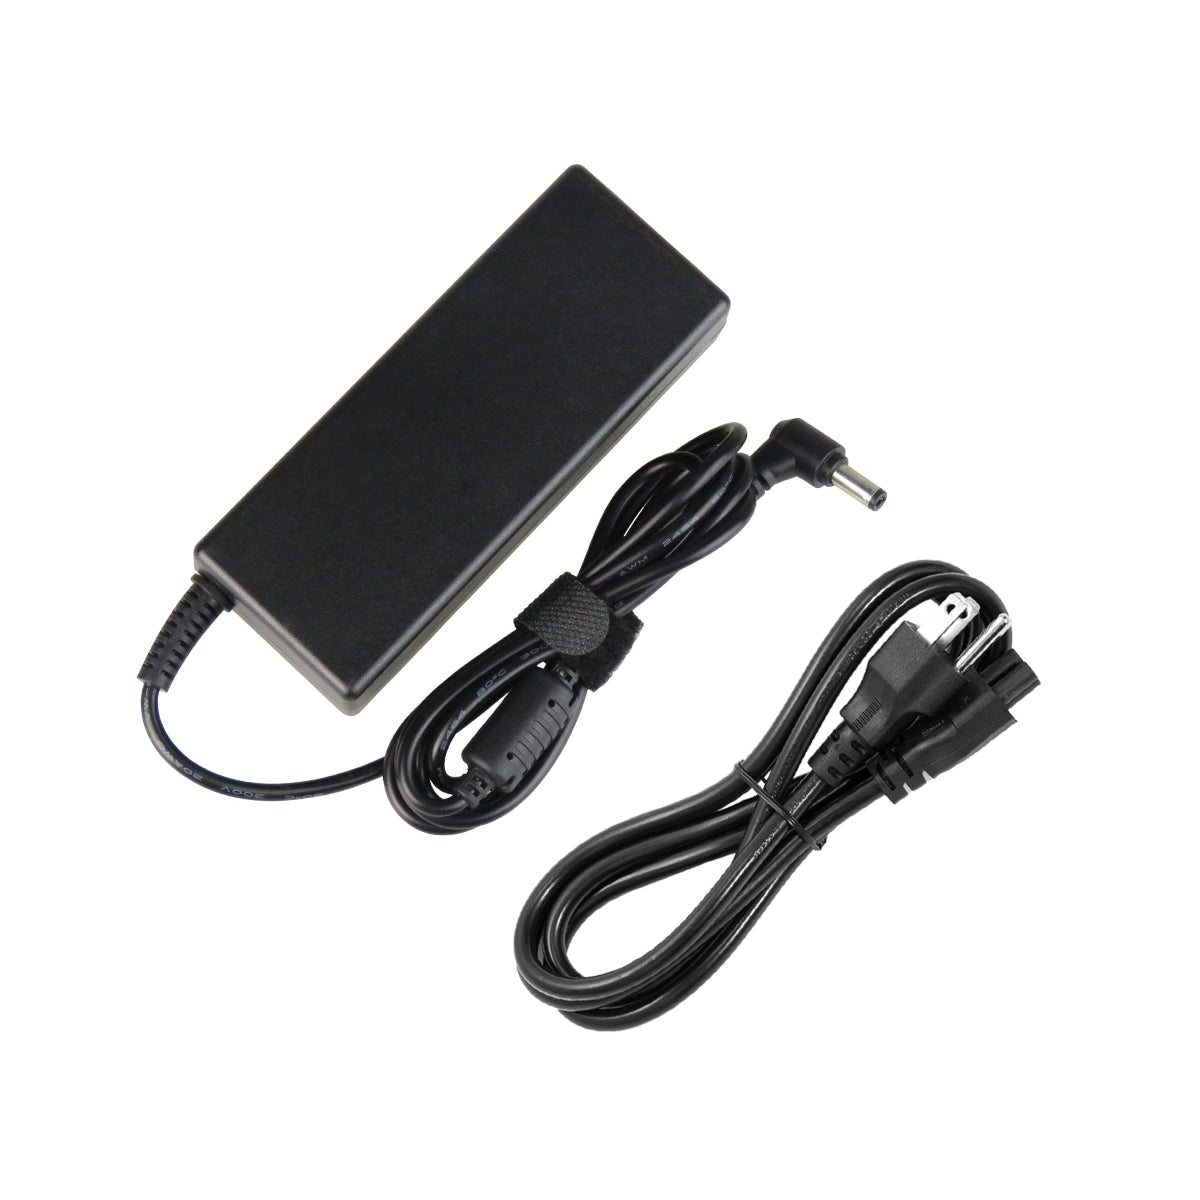 AC Adapter Charger for ASUS X72 Series Notebook.